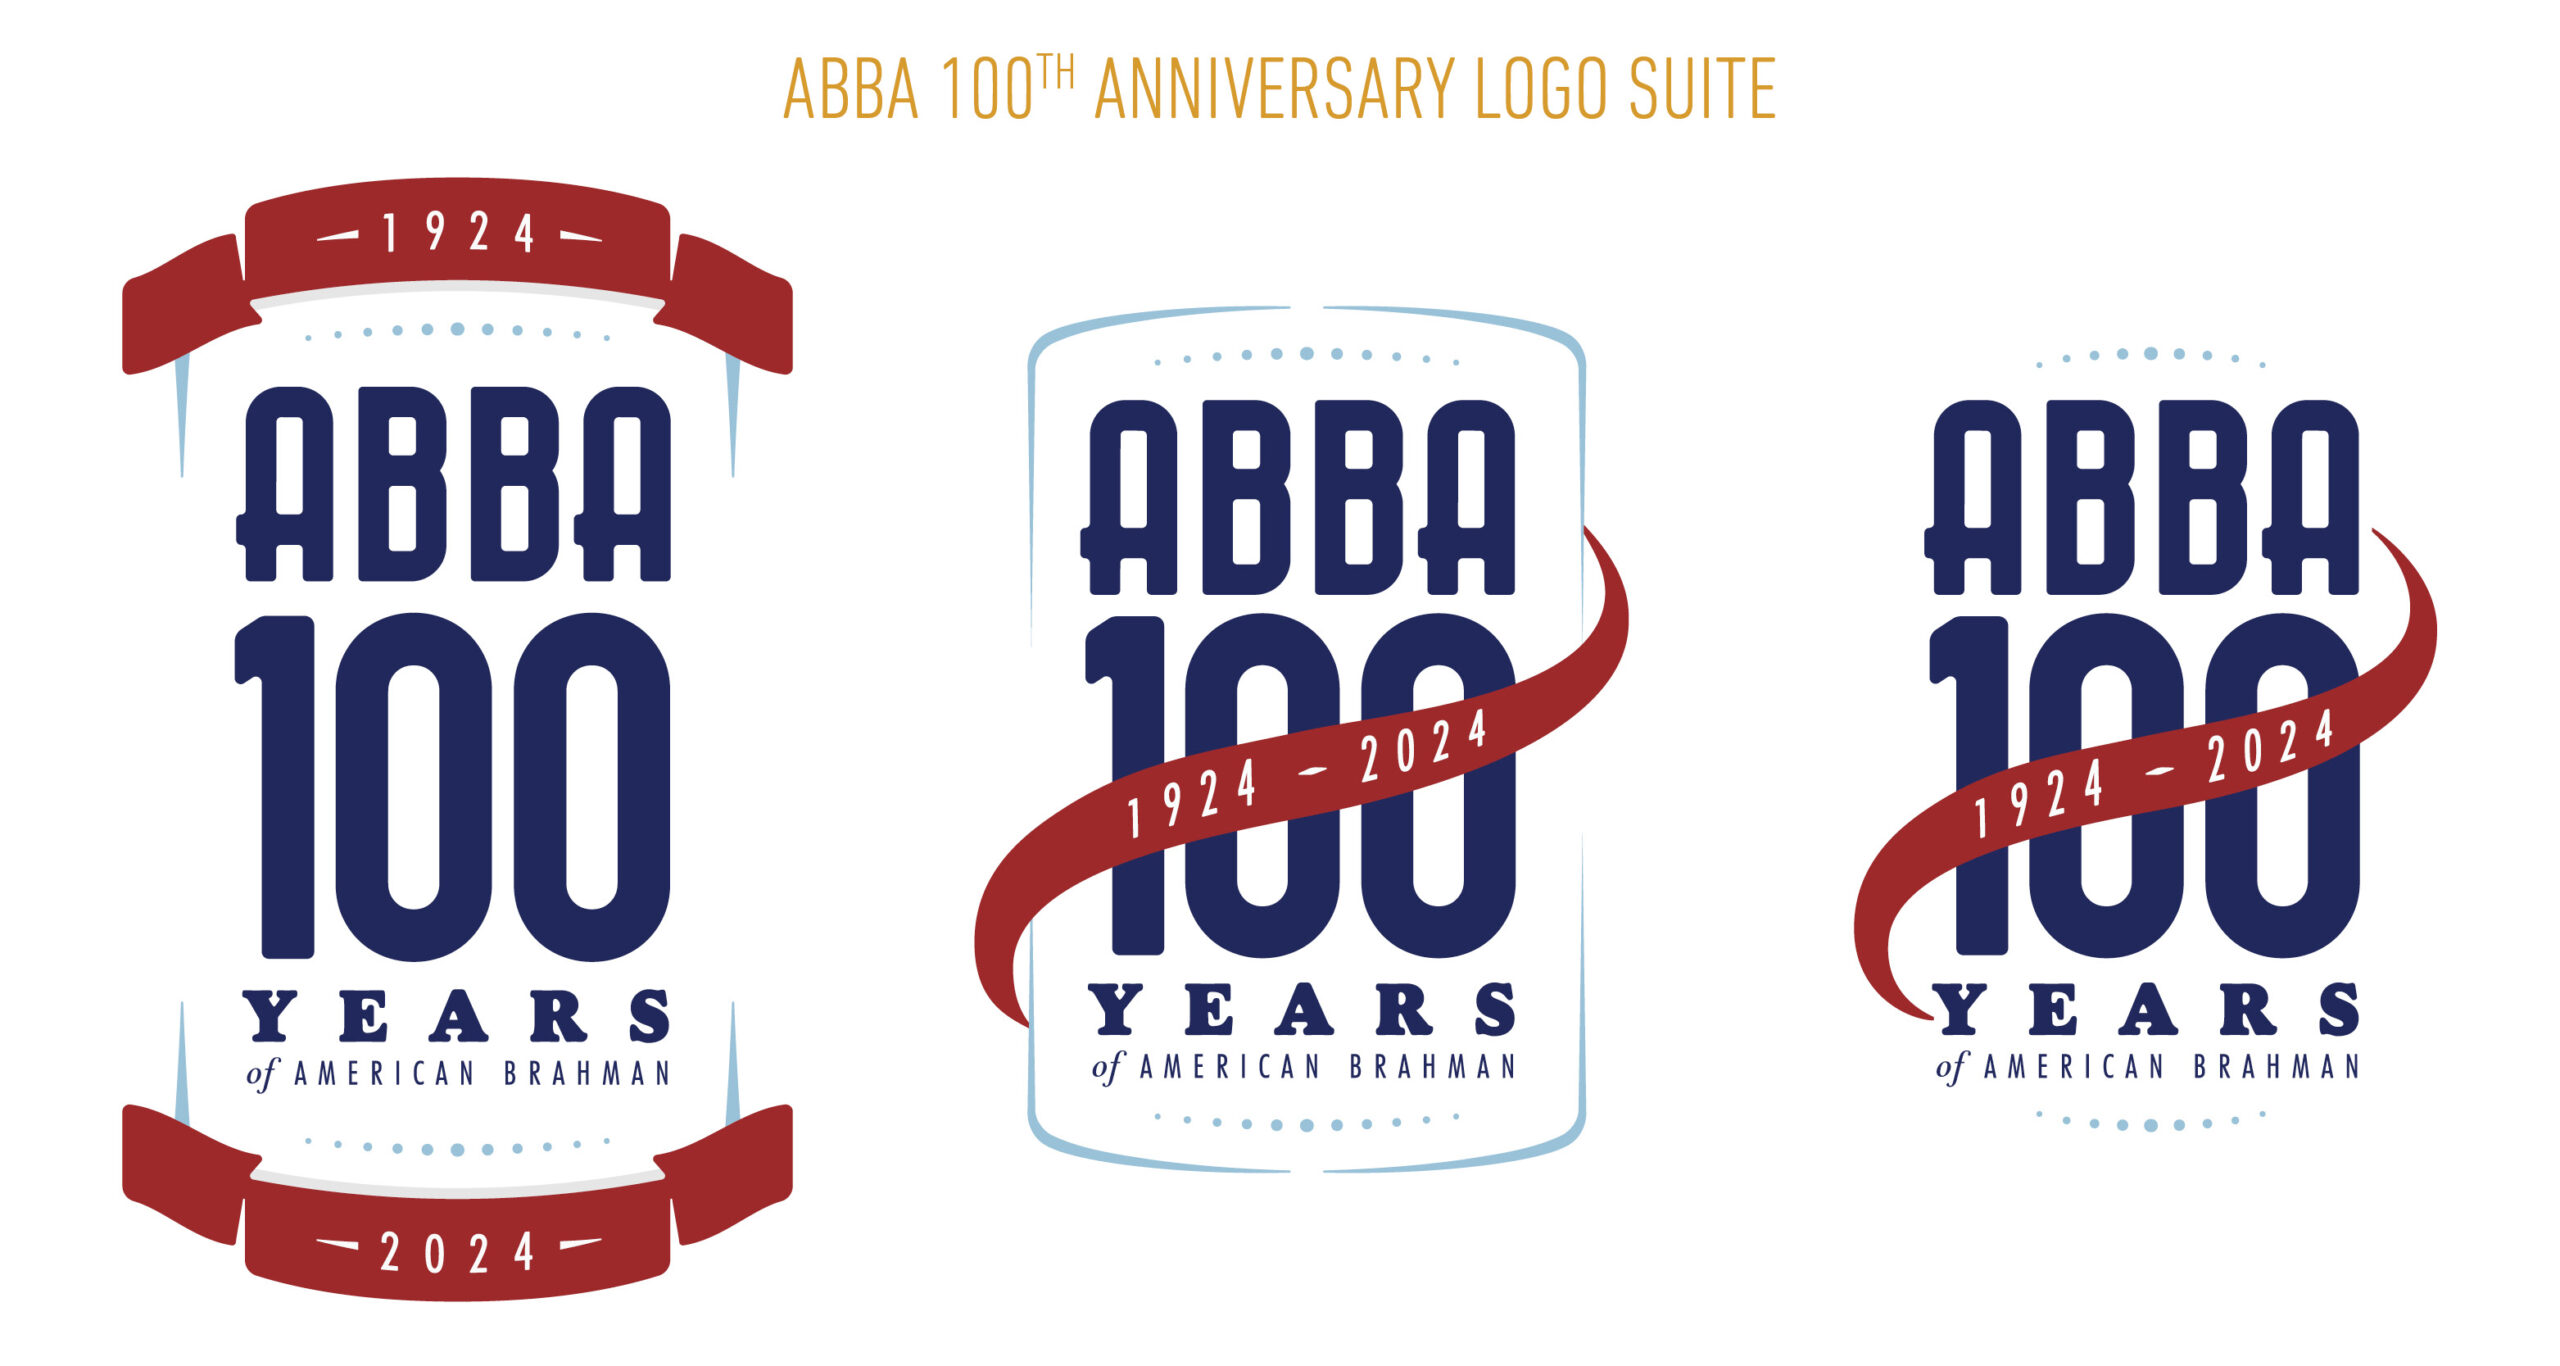 ABBA 100th anniversary logo suite designed by Catherine Neumayr